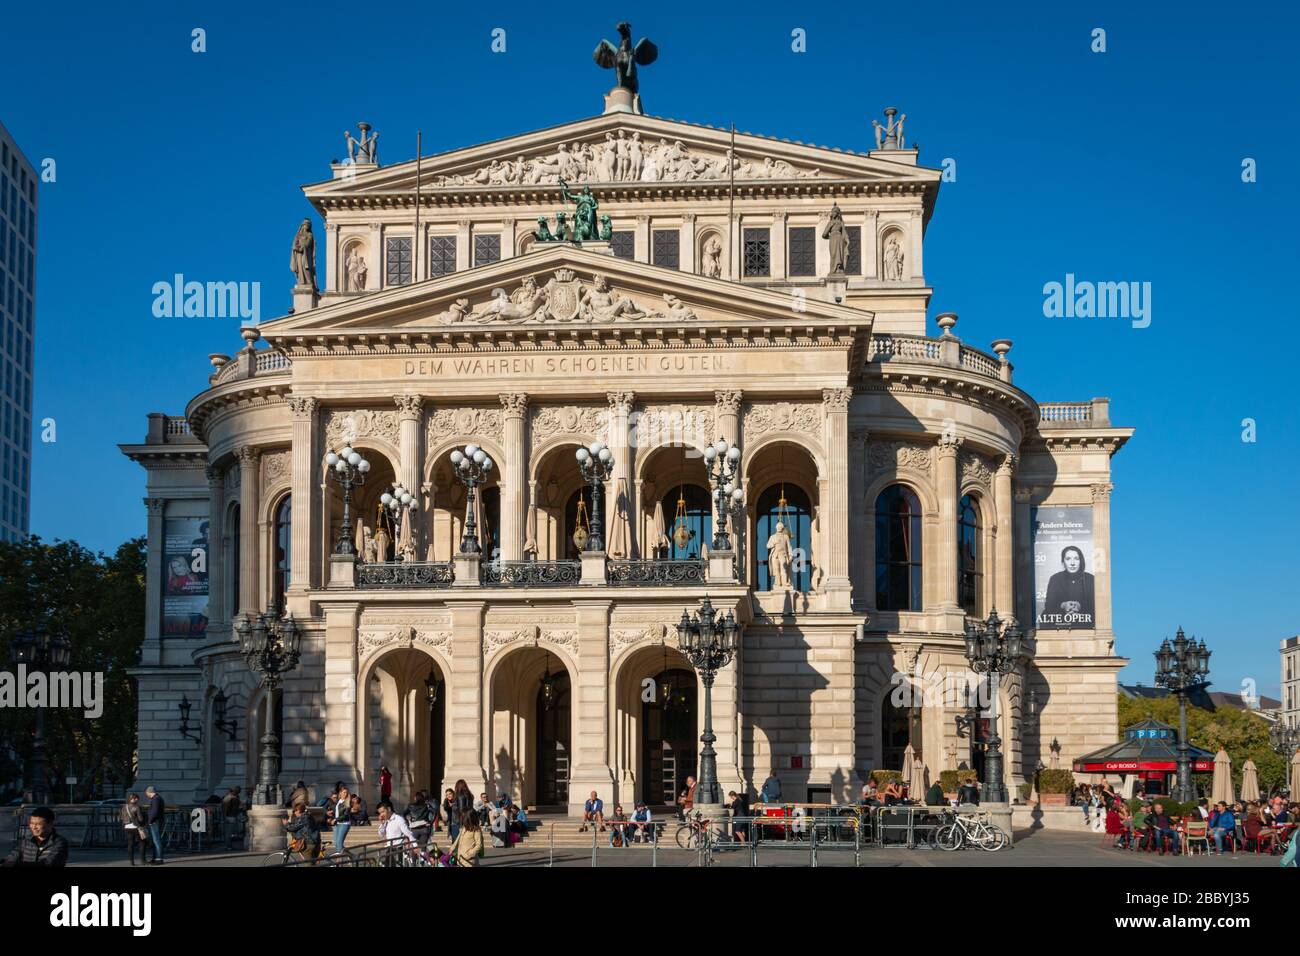 Page 2 - Dem Schonen High Resolution Stock Photography and Images - Alamy